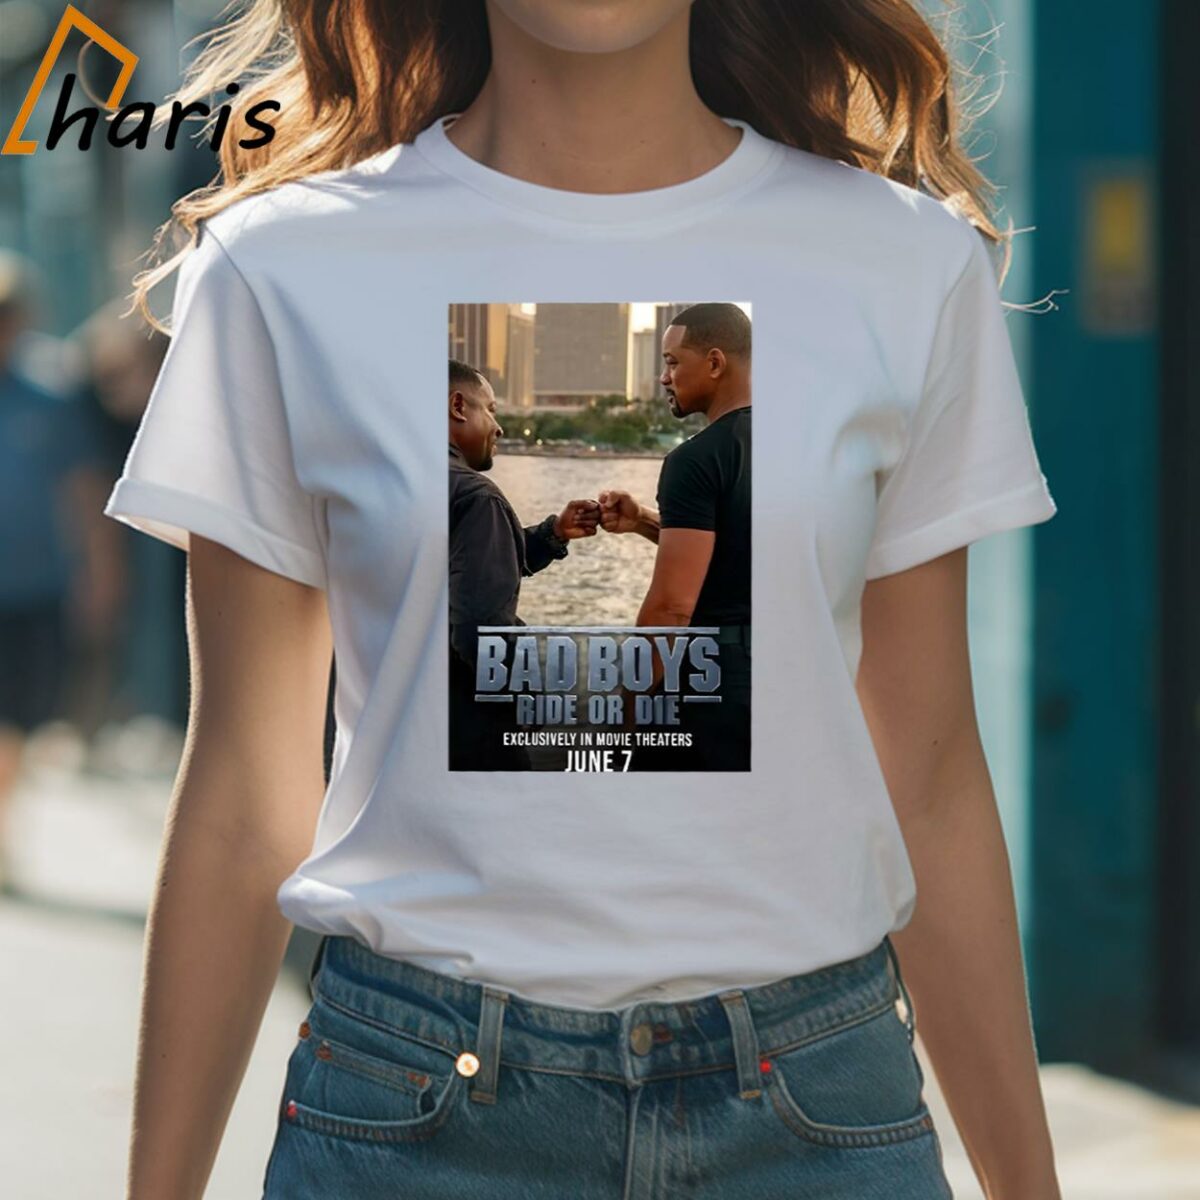 Bad Boys Rise Or Die In Theaters On June 7 Unisex T Shirt 1 Shirt